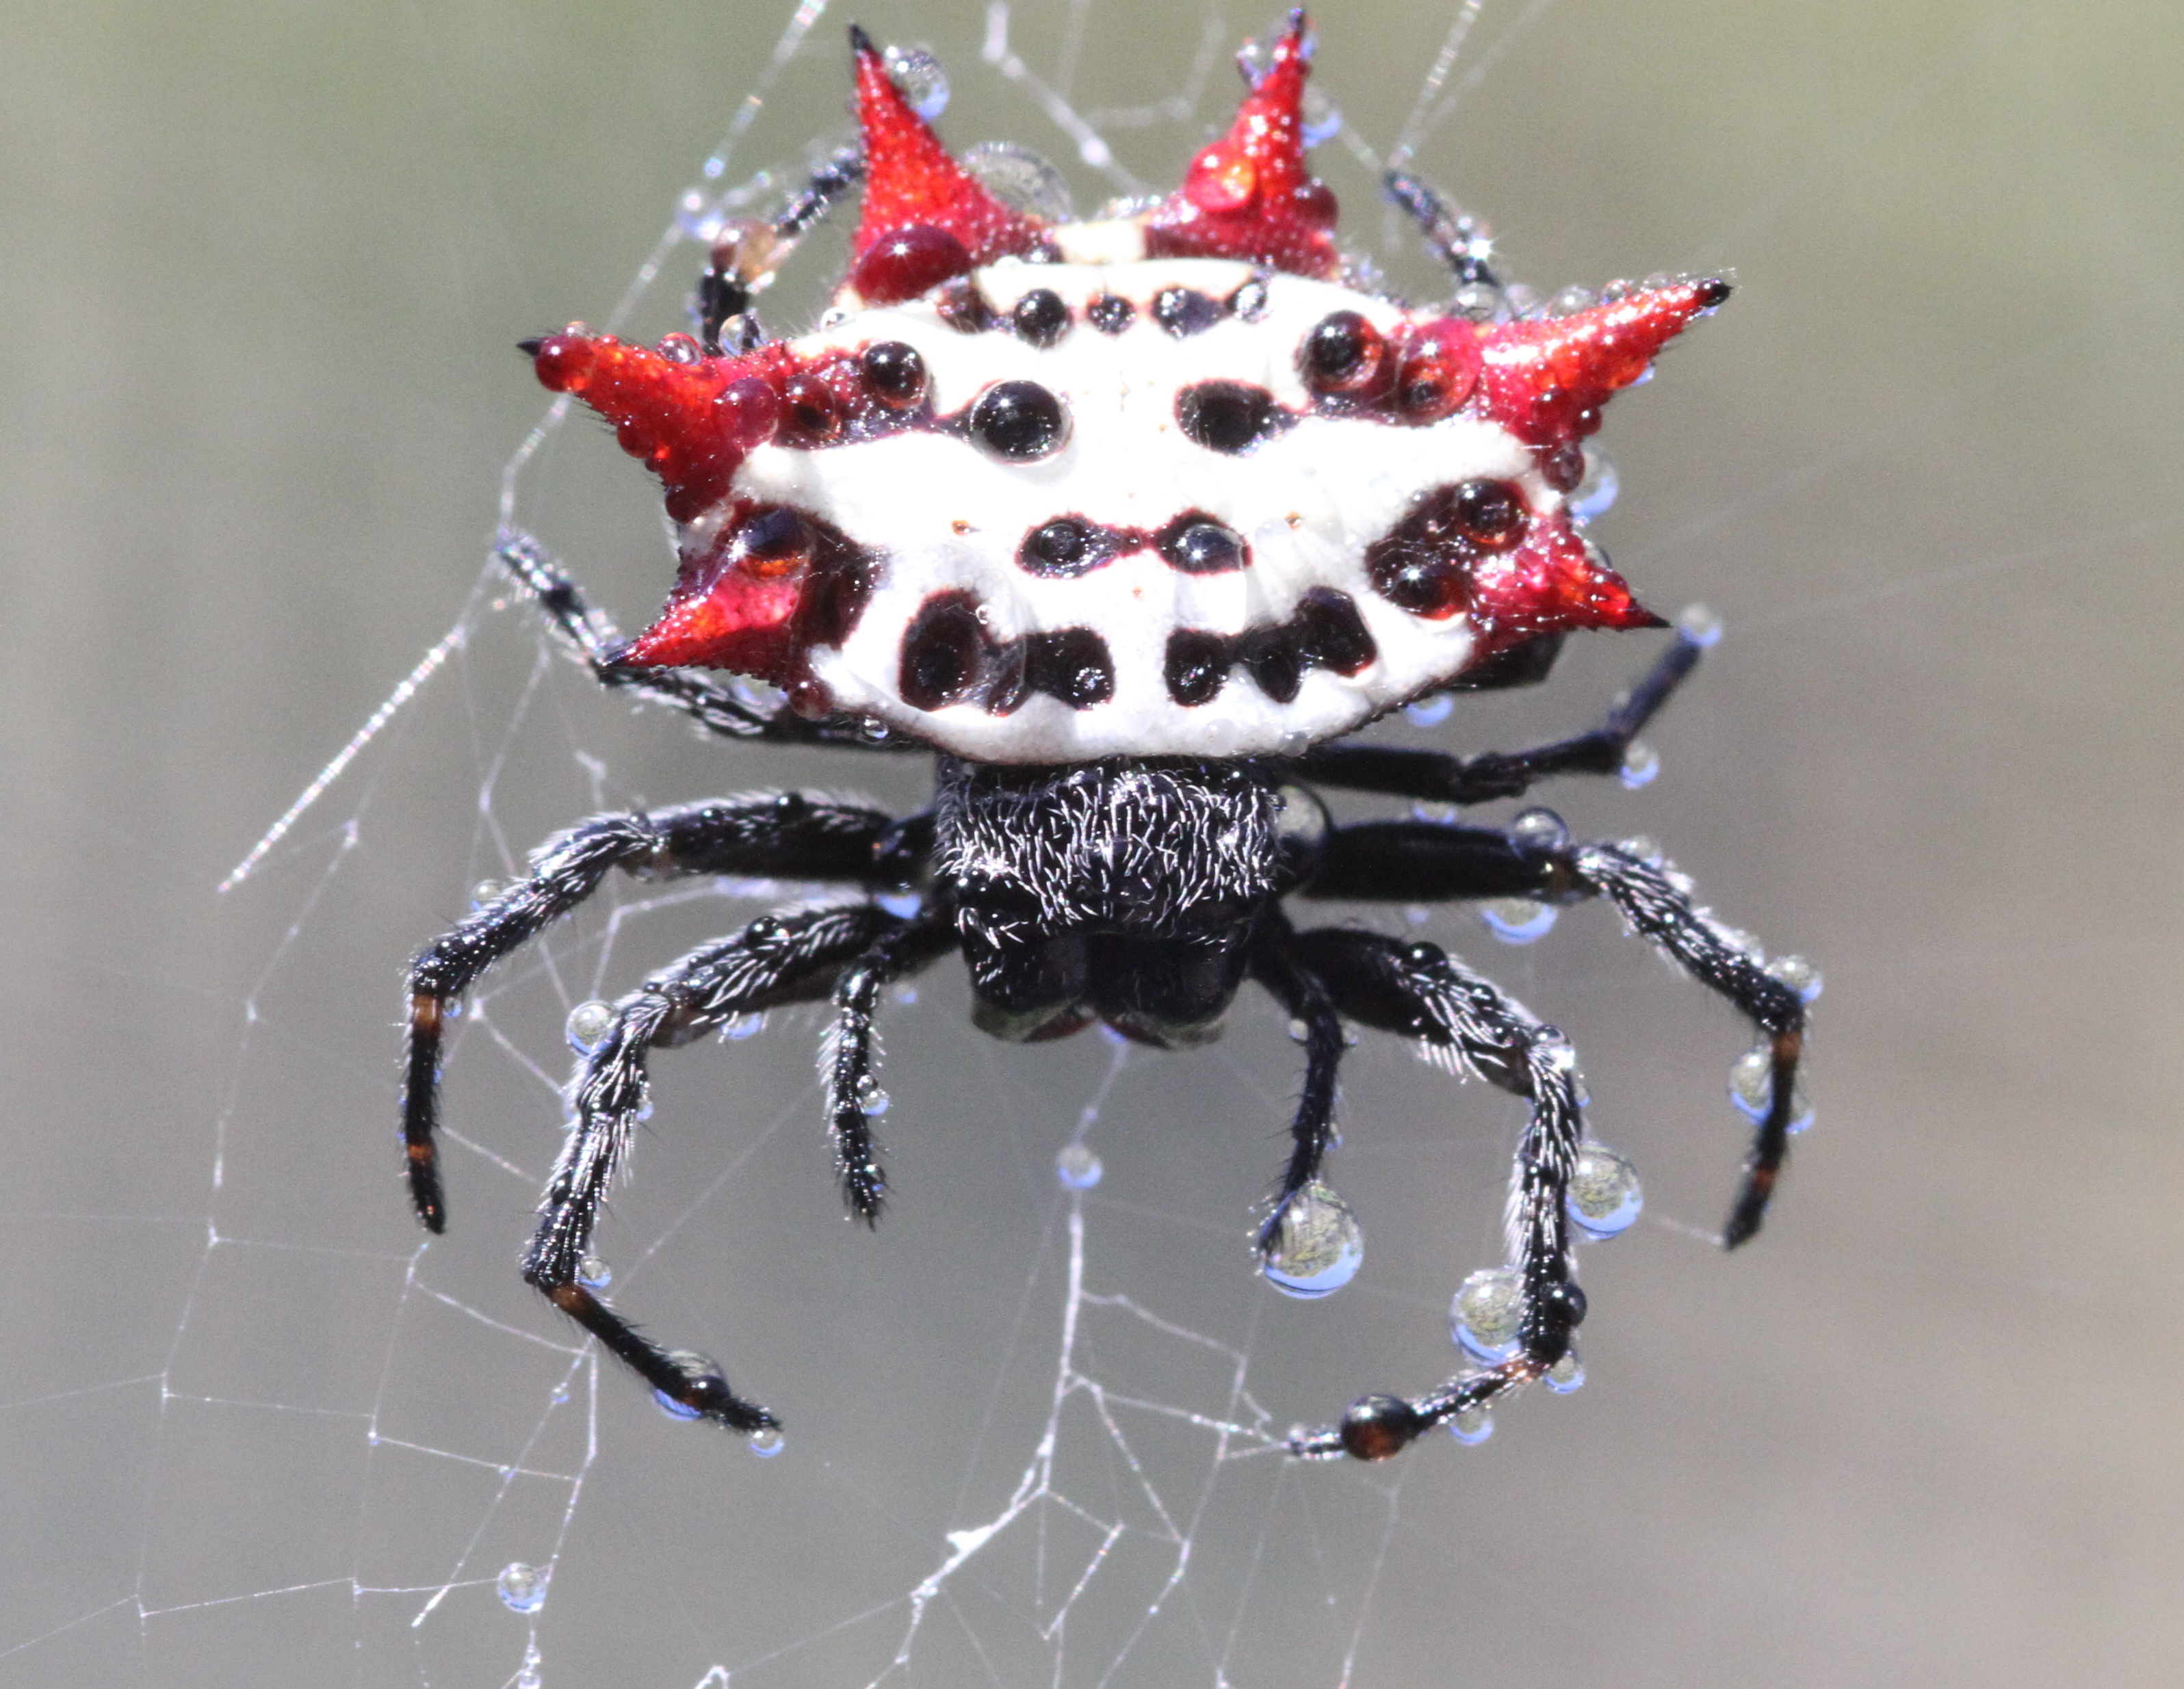 The Spiny Orb Weaver Spider.